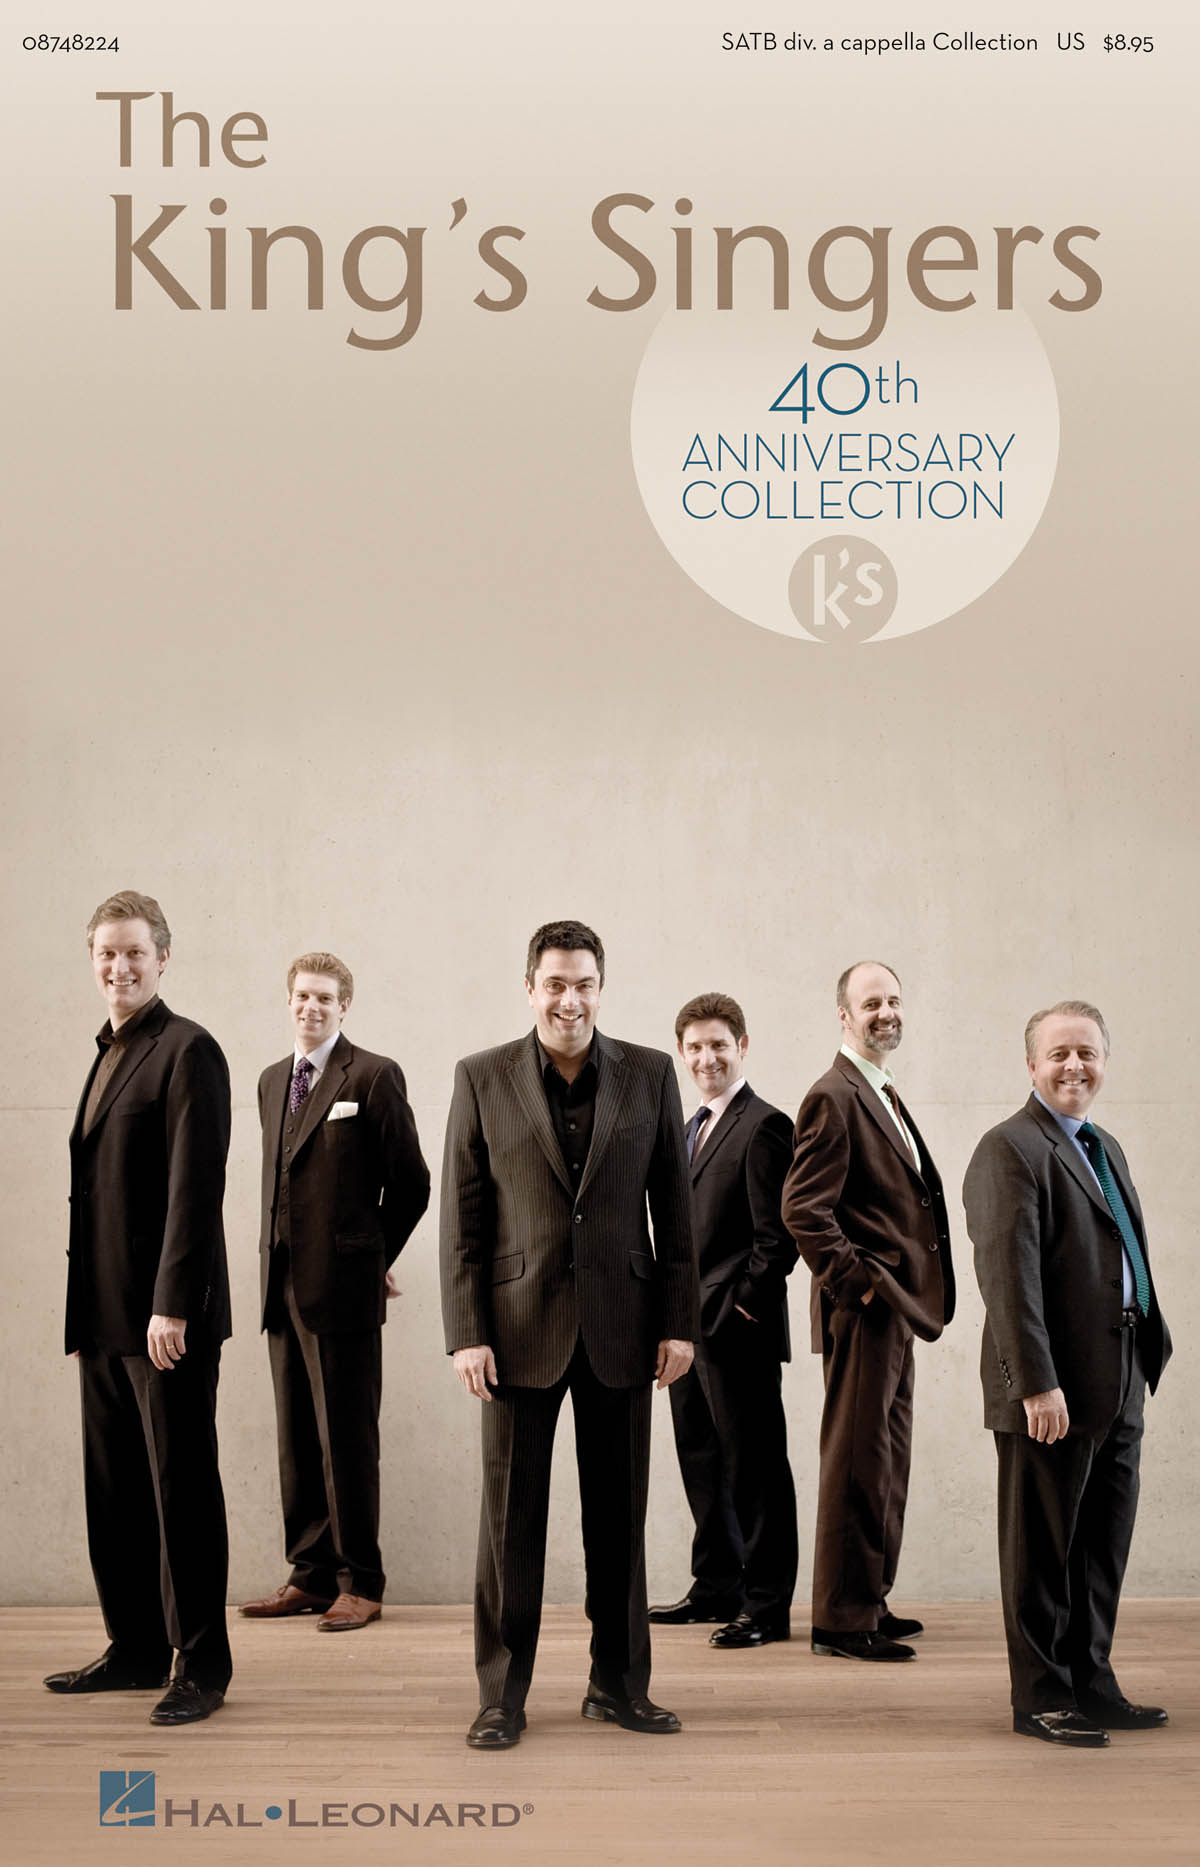 The King's Singers 40th Anniversary Collection: SATB: Vocal Score